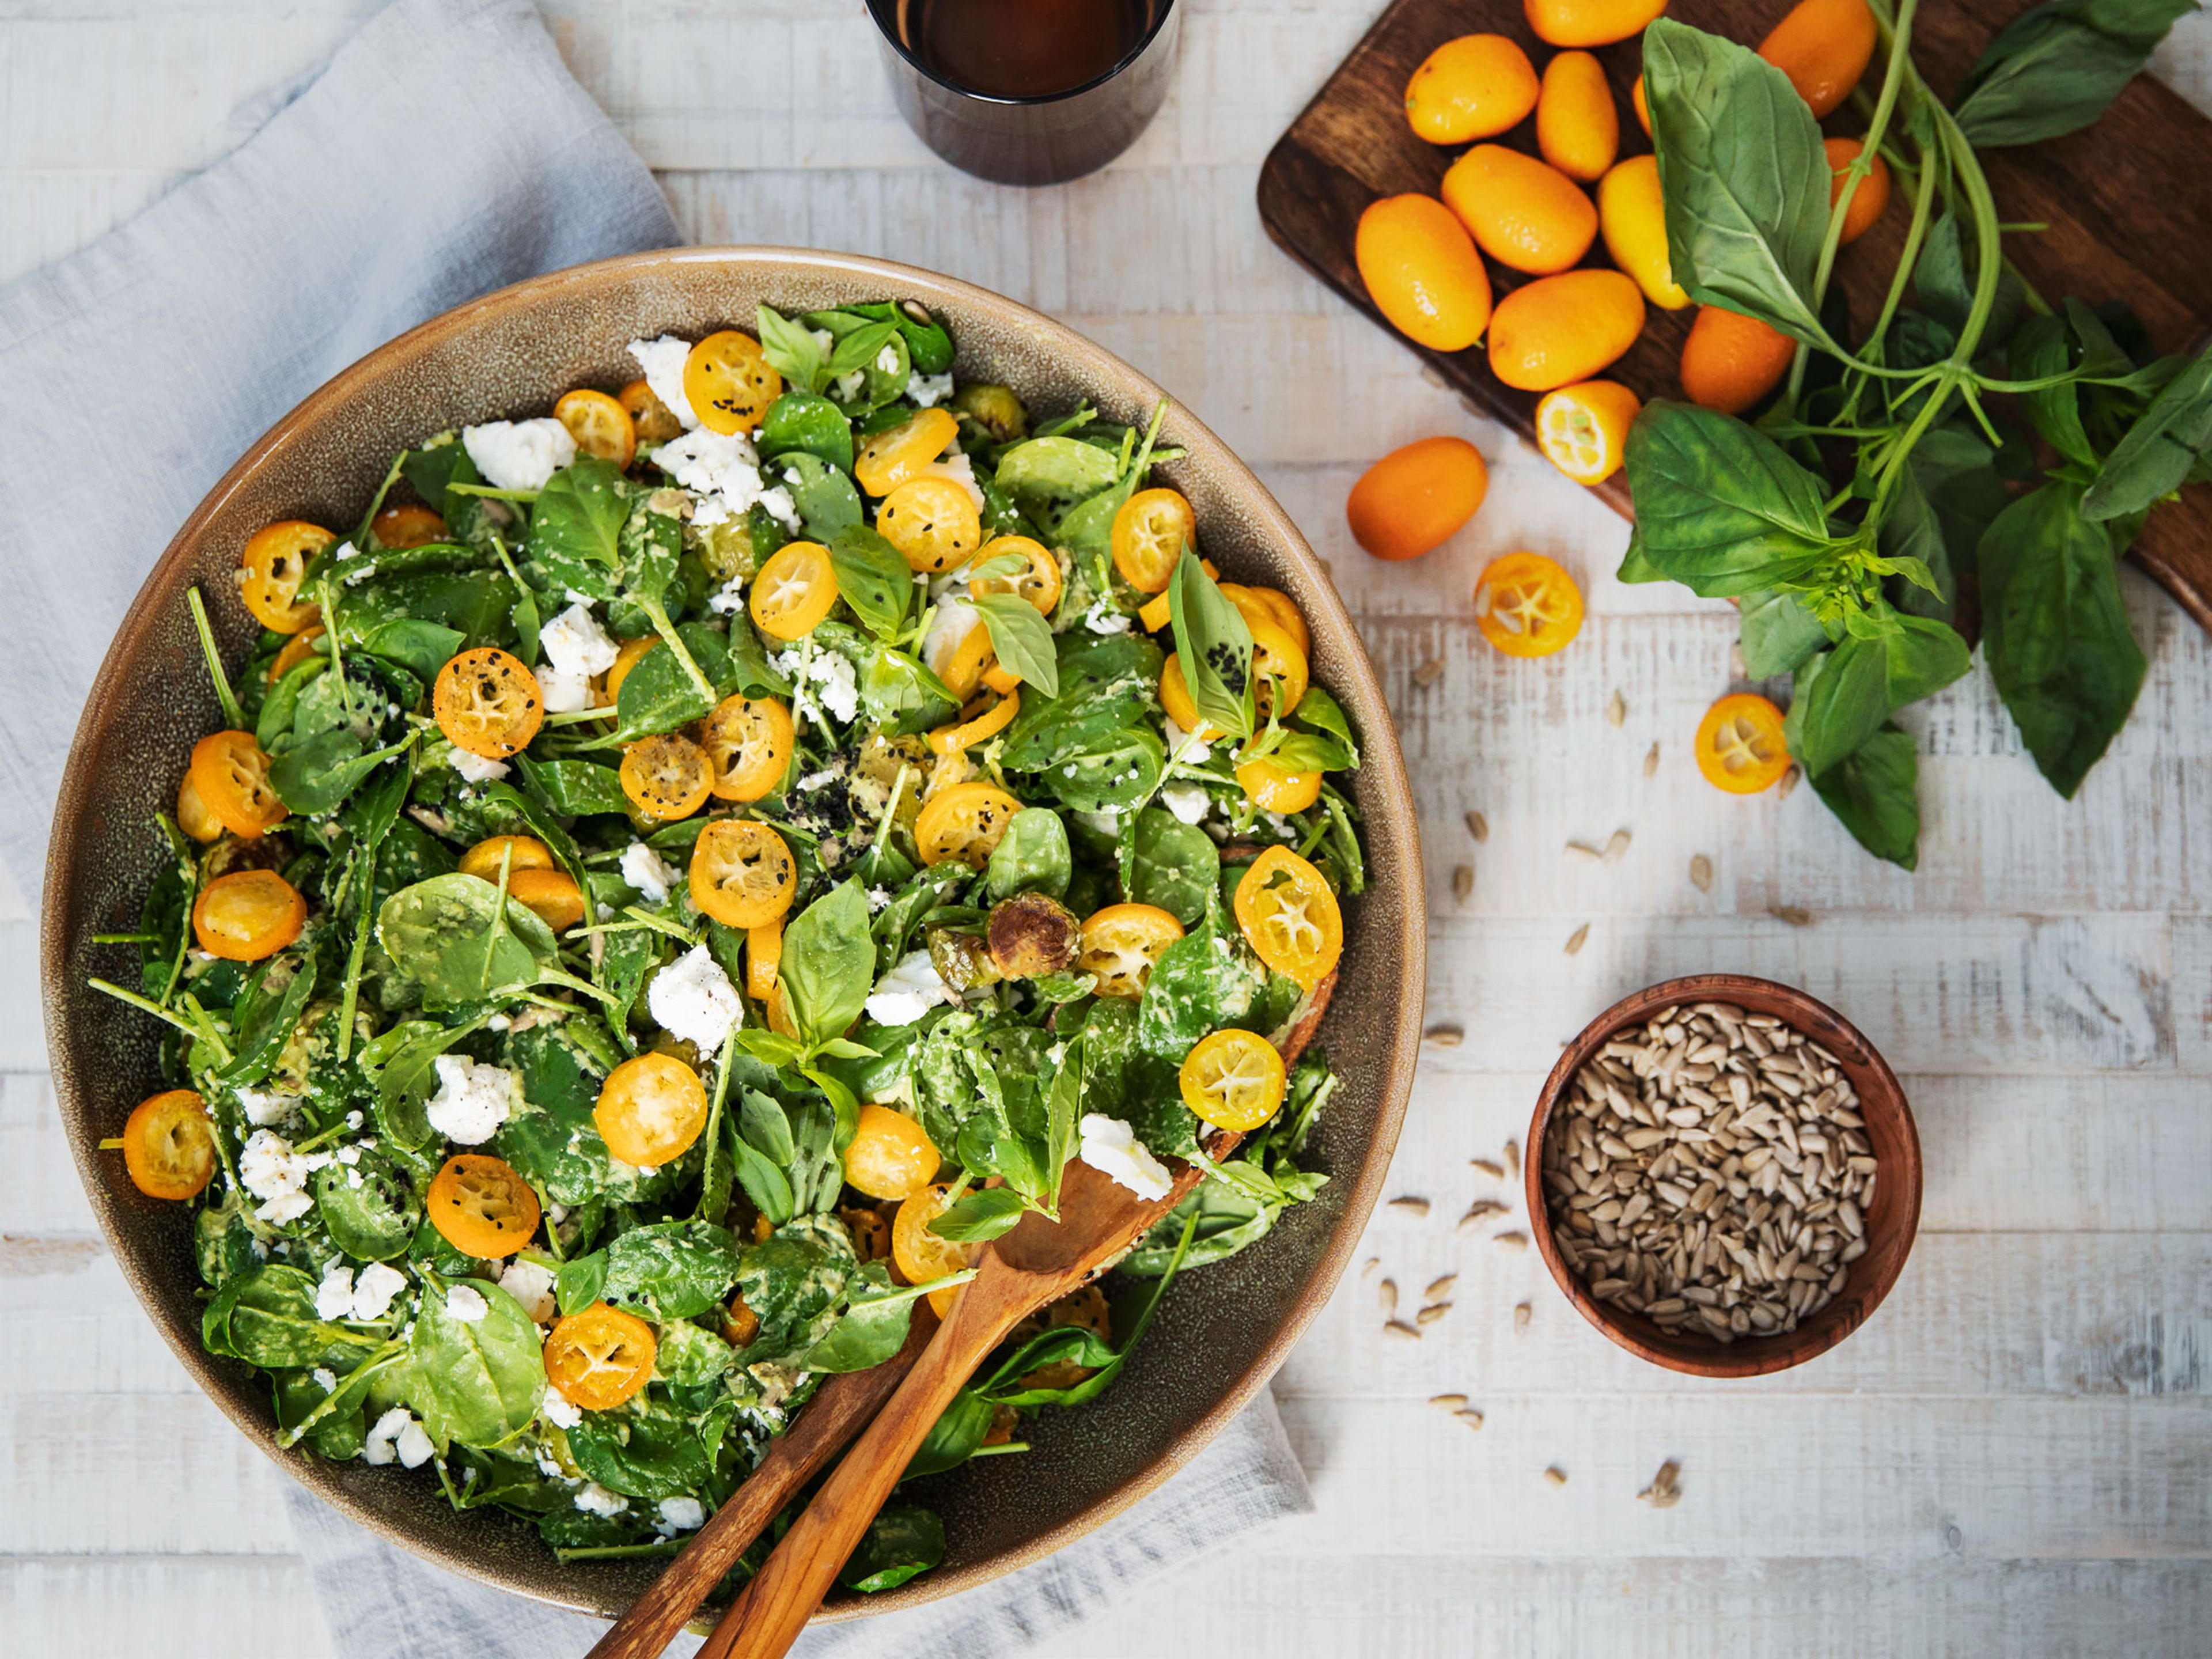 Kumquat and roasted Brussels sprout salad with avocado dressing